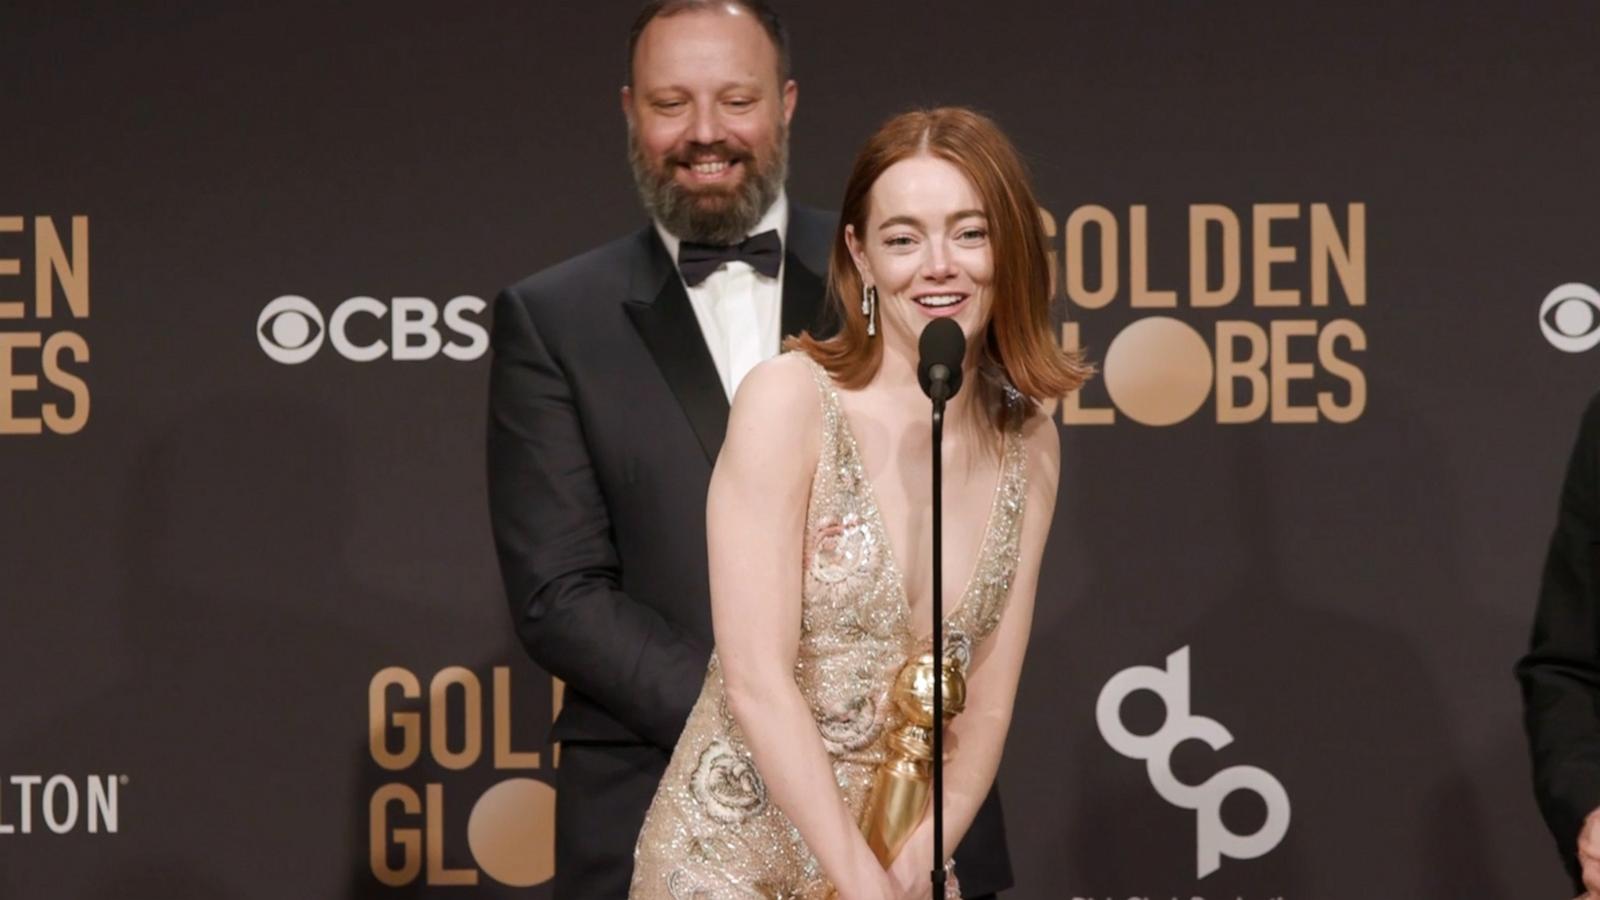 VIDEO: Emma Stone had the best response to Taylor Swift cheering for her Golden Globes win